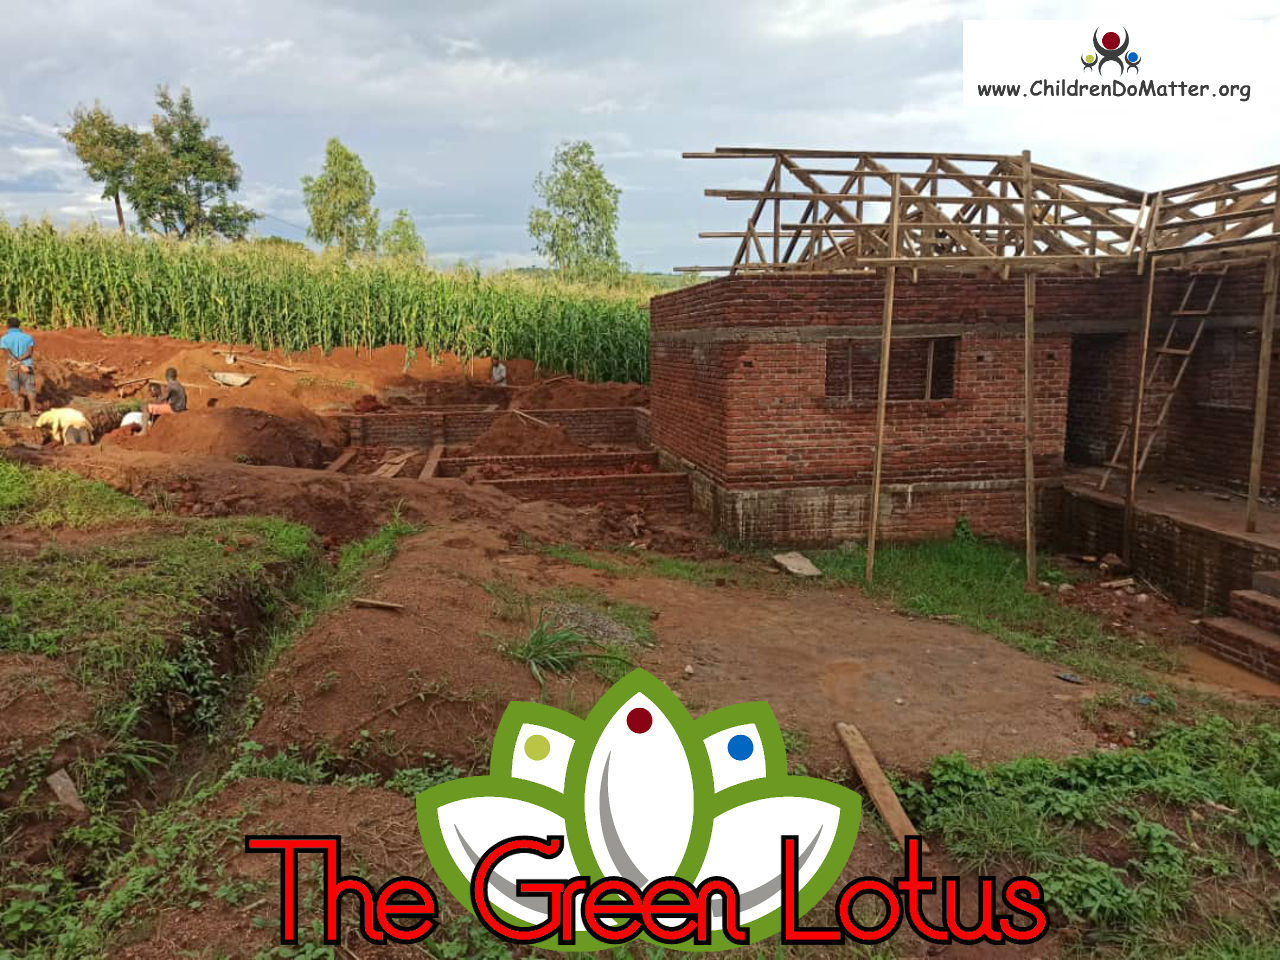 the making of the green lotus orphanage in blantyre malawi - children do matter - 18